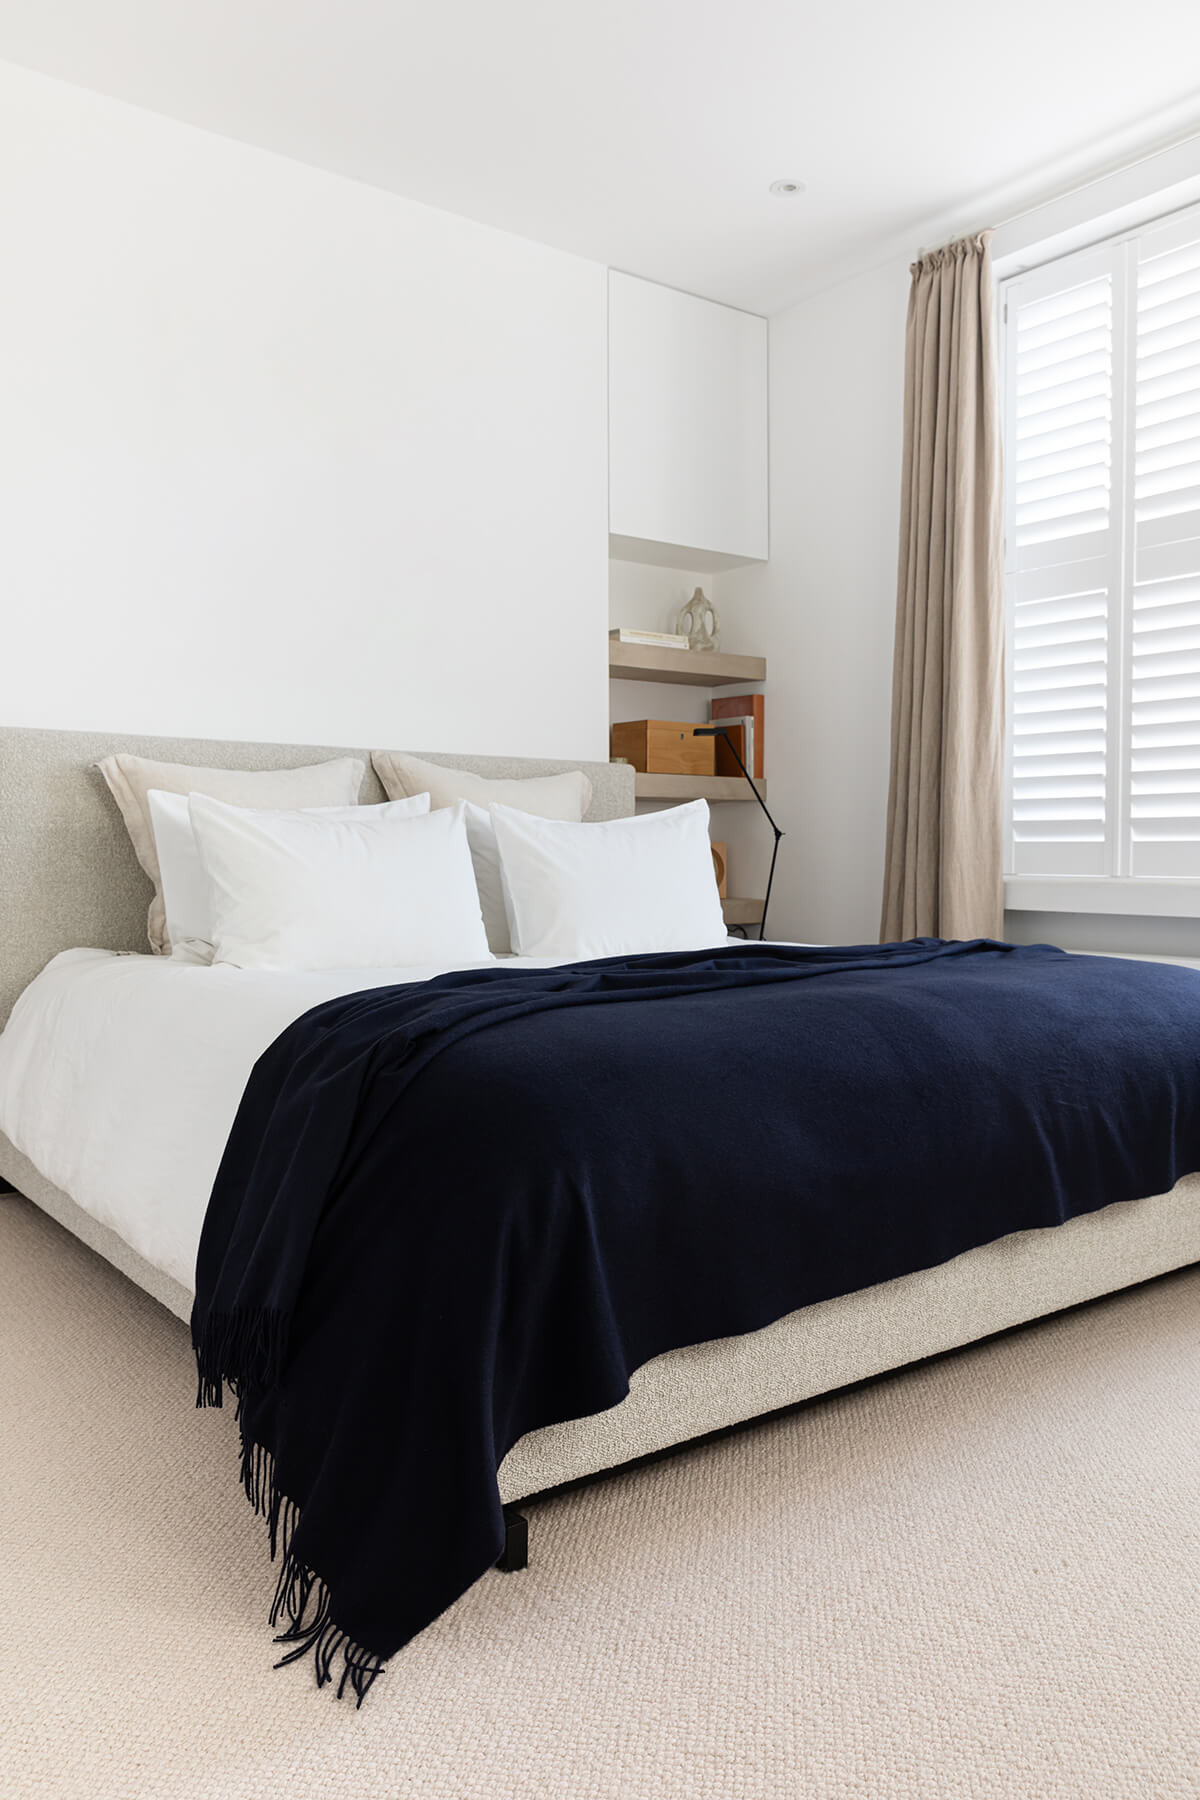 Johnstons of Elgin’s Cashmere Bed Throw in Navy on bed in neutral bedroom WA001159SD7330ONE